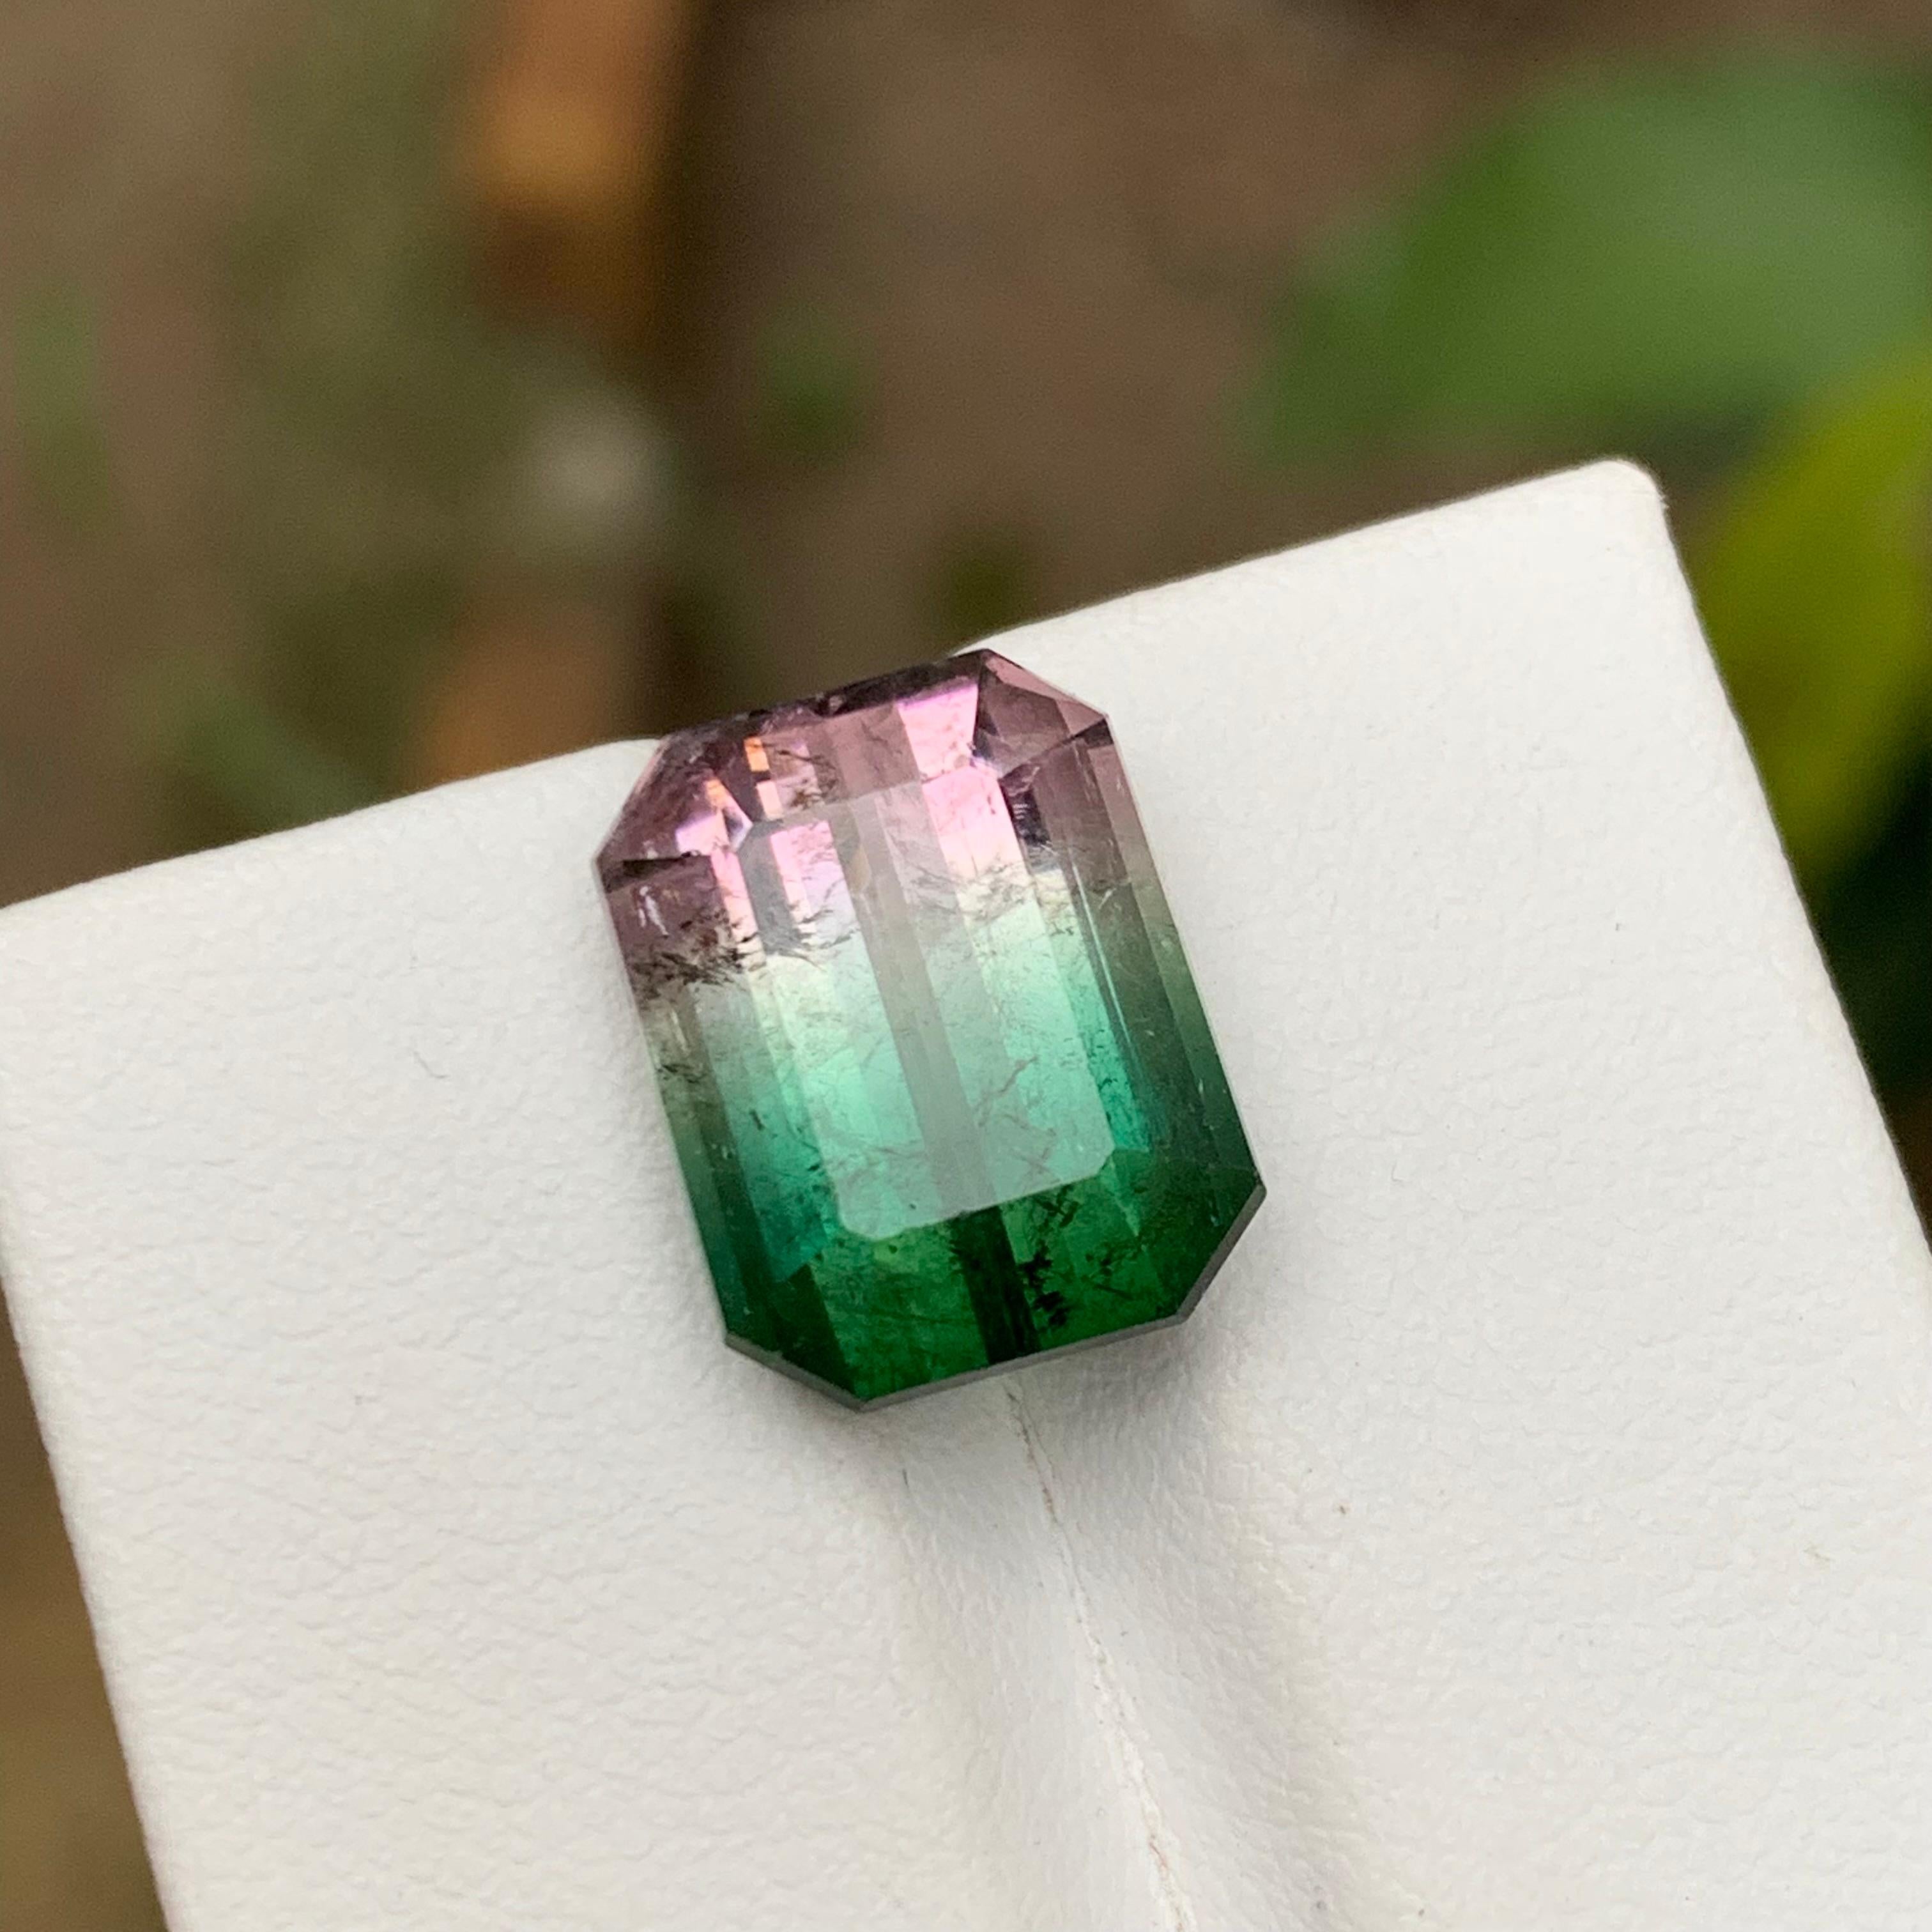 GEMSTONE TYPE: Tourmaline
PIECE(S): 1
WEIGHT: 10.15 Carat
SHAPE: Emerald Cut
SIZE (MM): 13.65 x 10.54 x 8.19
COLOR: Watermelon Bicolor Bluish Green & Pink
CLARITY: Slightly Included
TREATMENT: Heated
ORIGIN: Afghanistan
CERTIFICATE: On